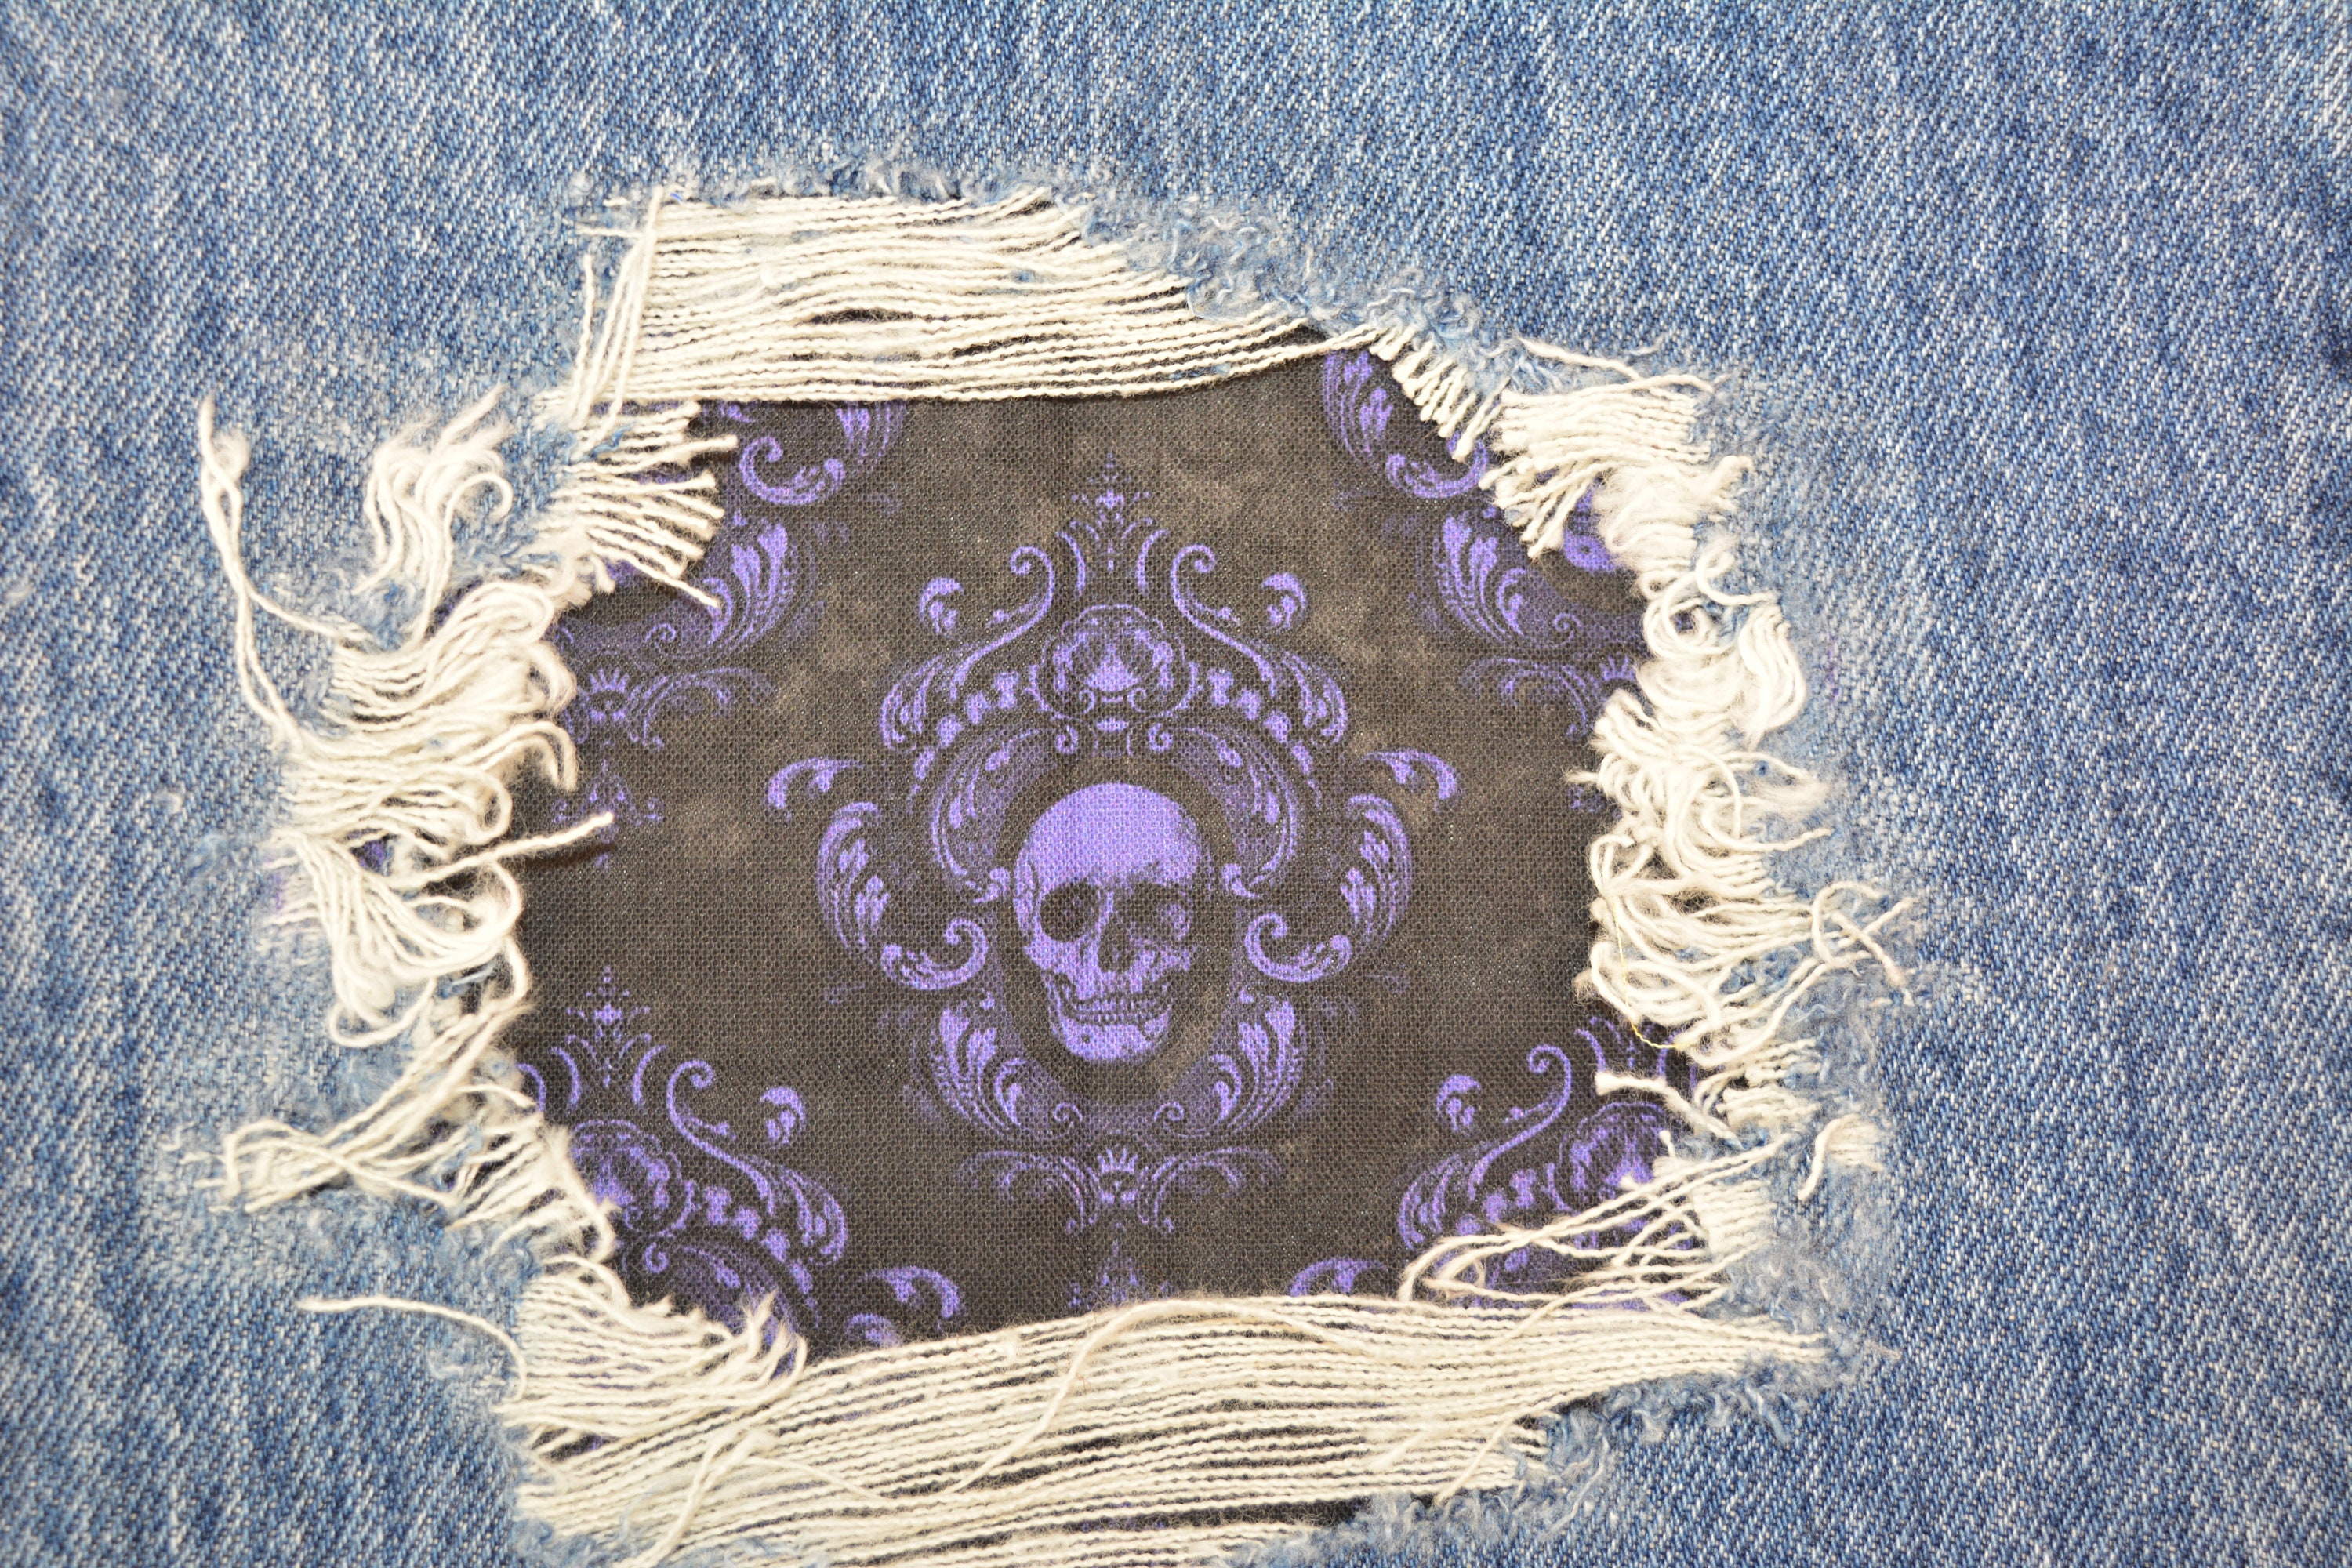 Skull Patch, Iron on Patches for Denim, Patches for Jeans, Easy to